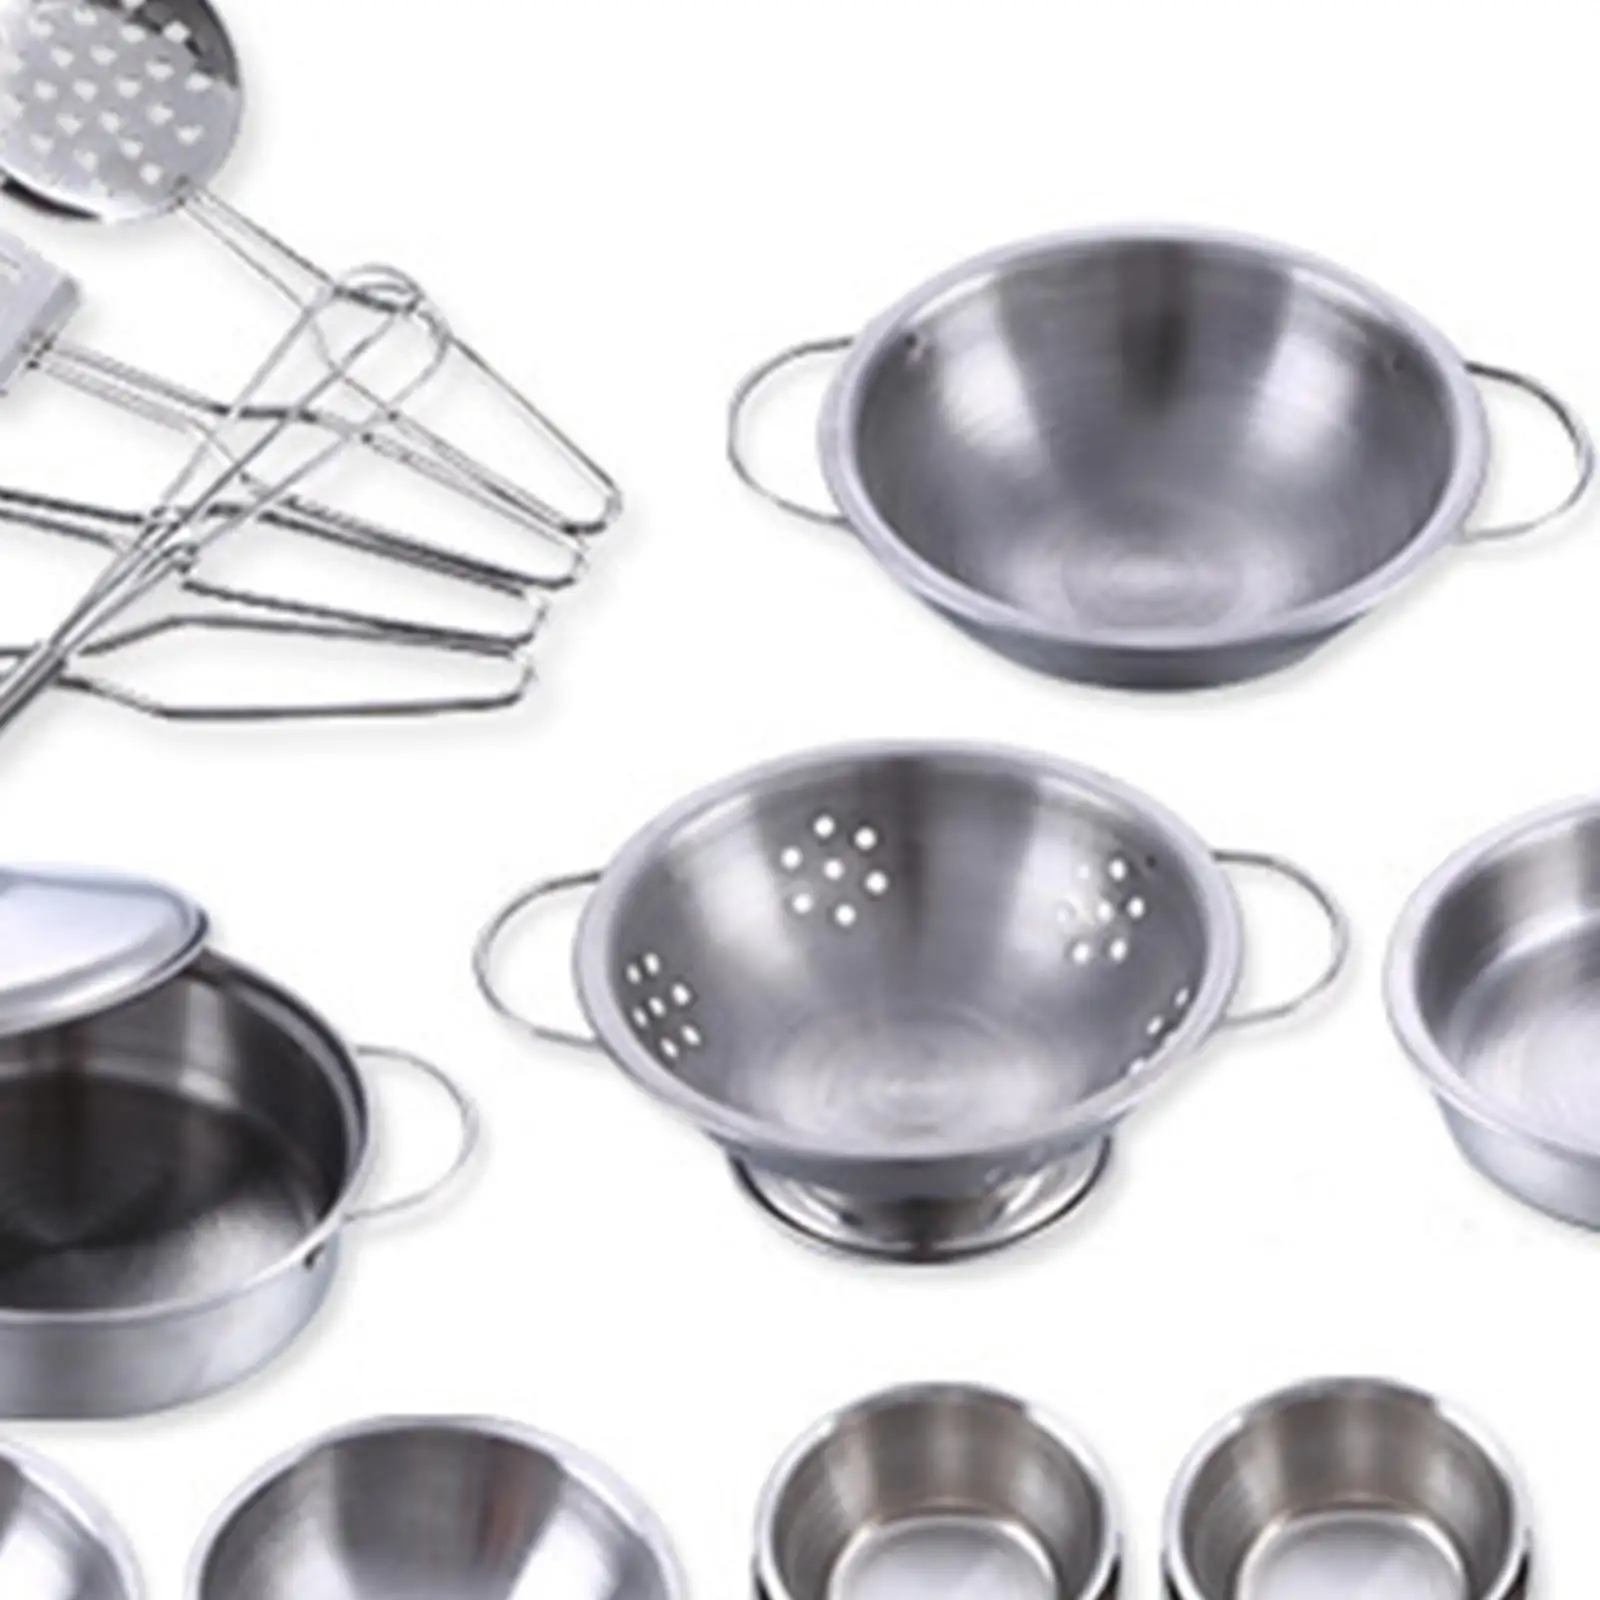 25Pcs Kitchen Pretend Toys Cooking Utensils Stainless Steel Durable Polished